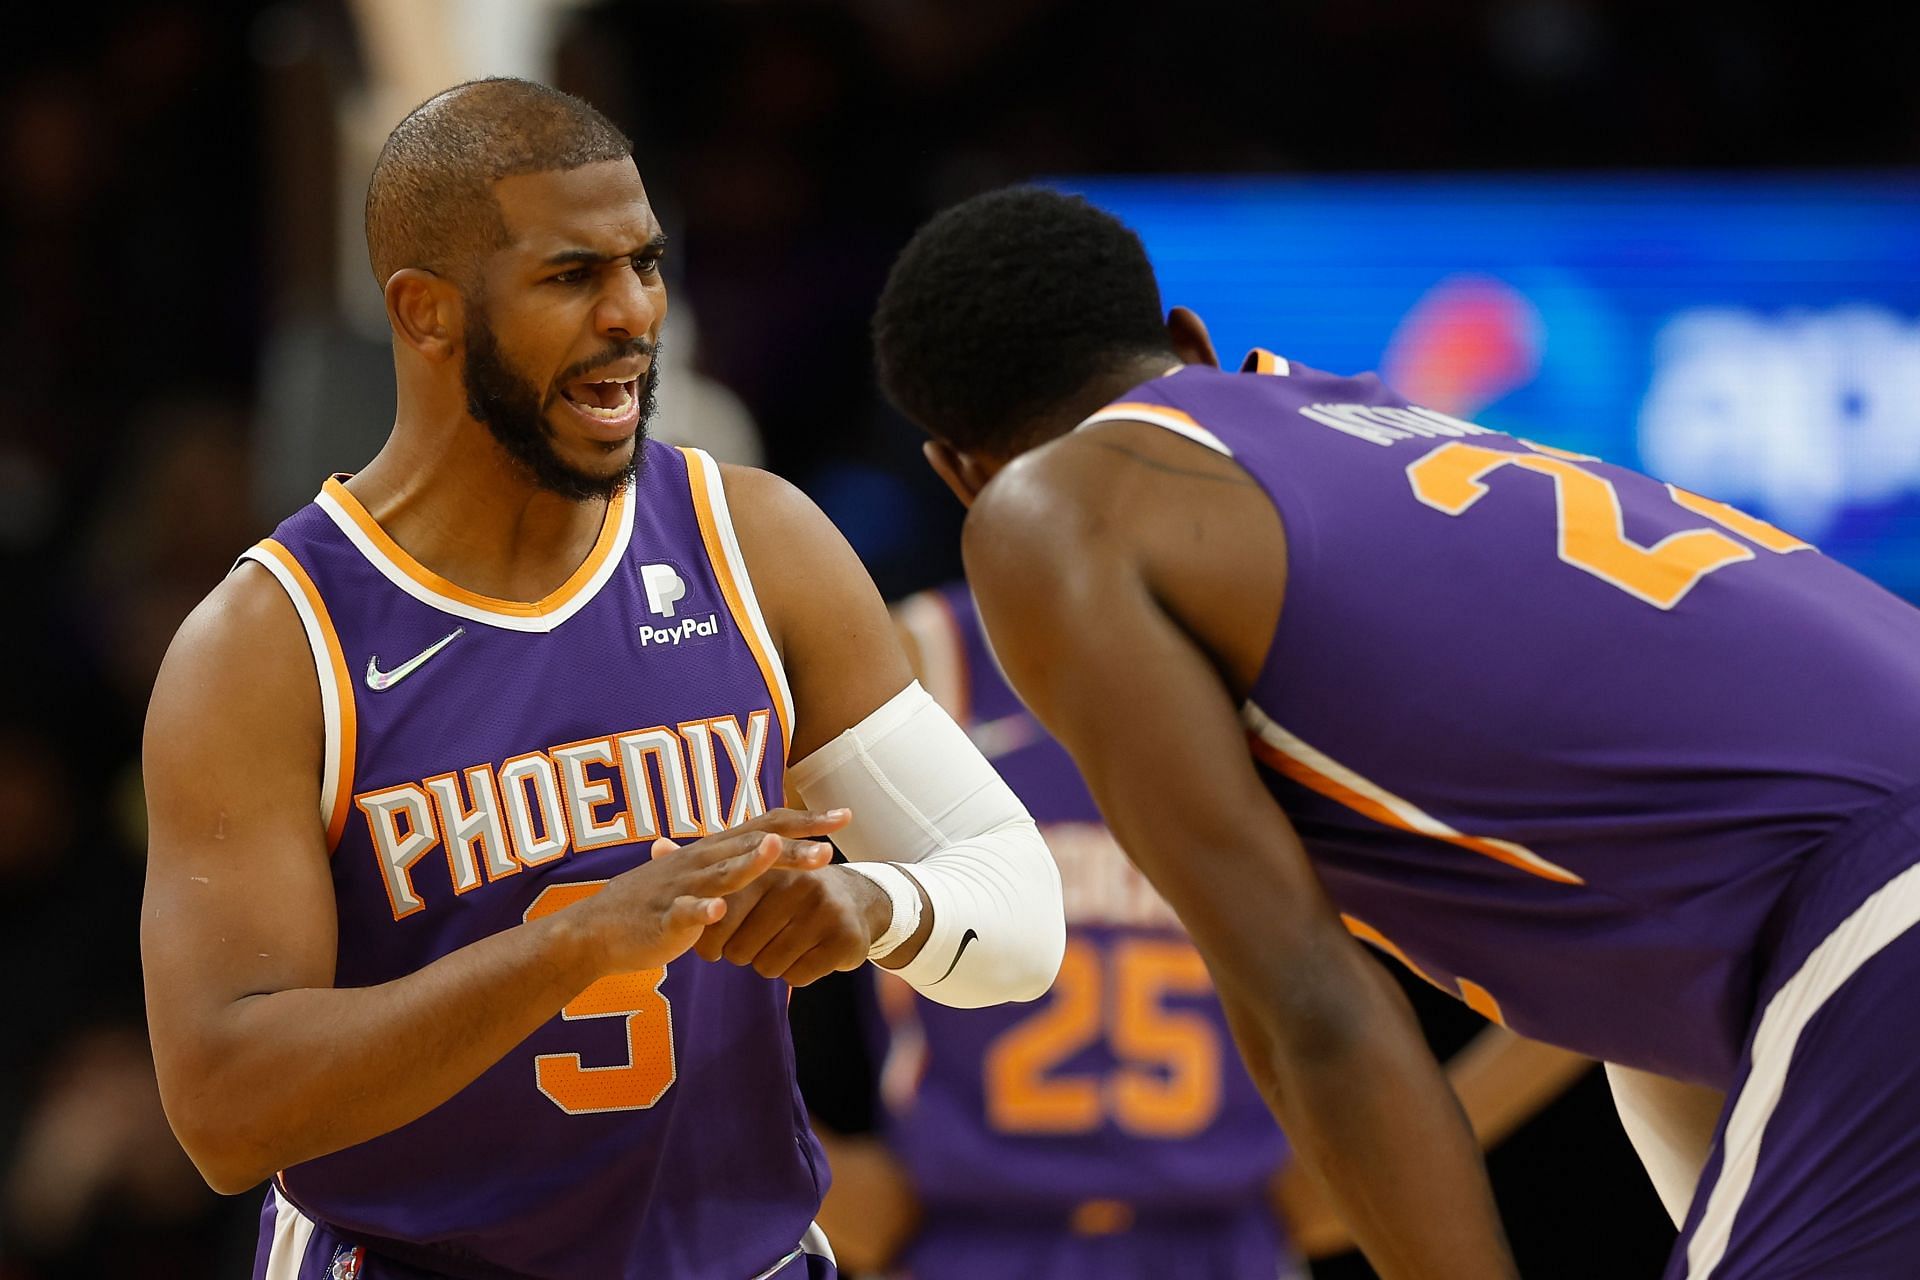 Chris Paul will miss 6-8 weeks with a thumb injury